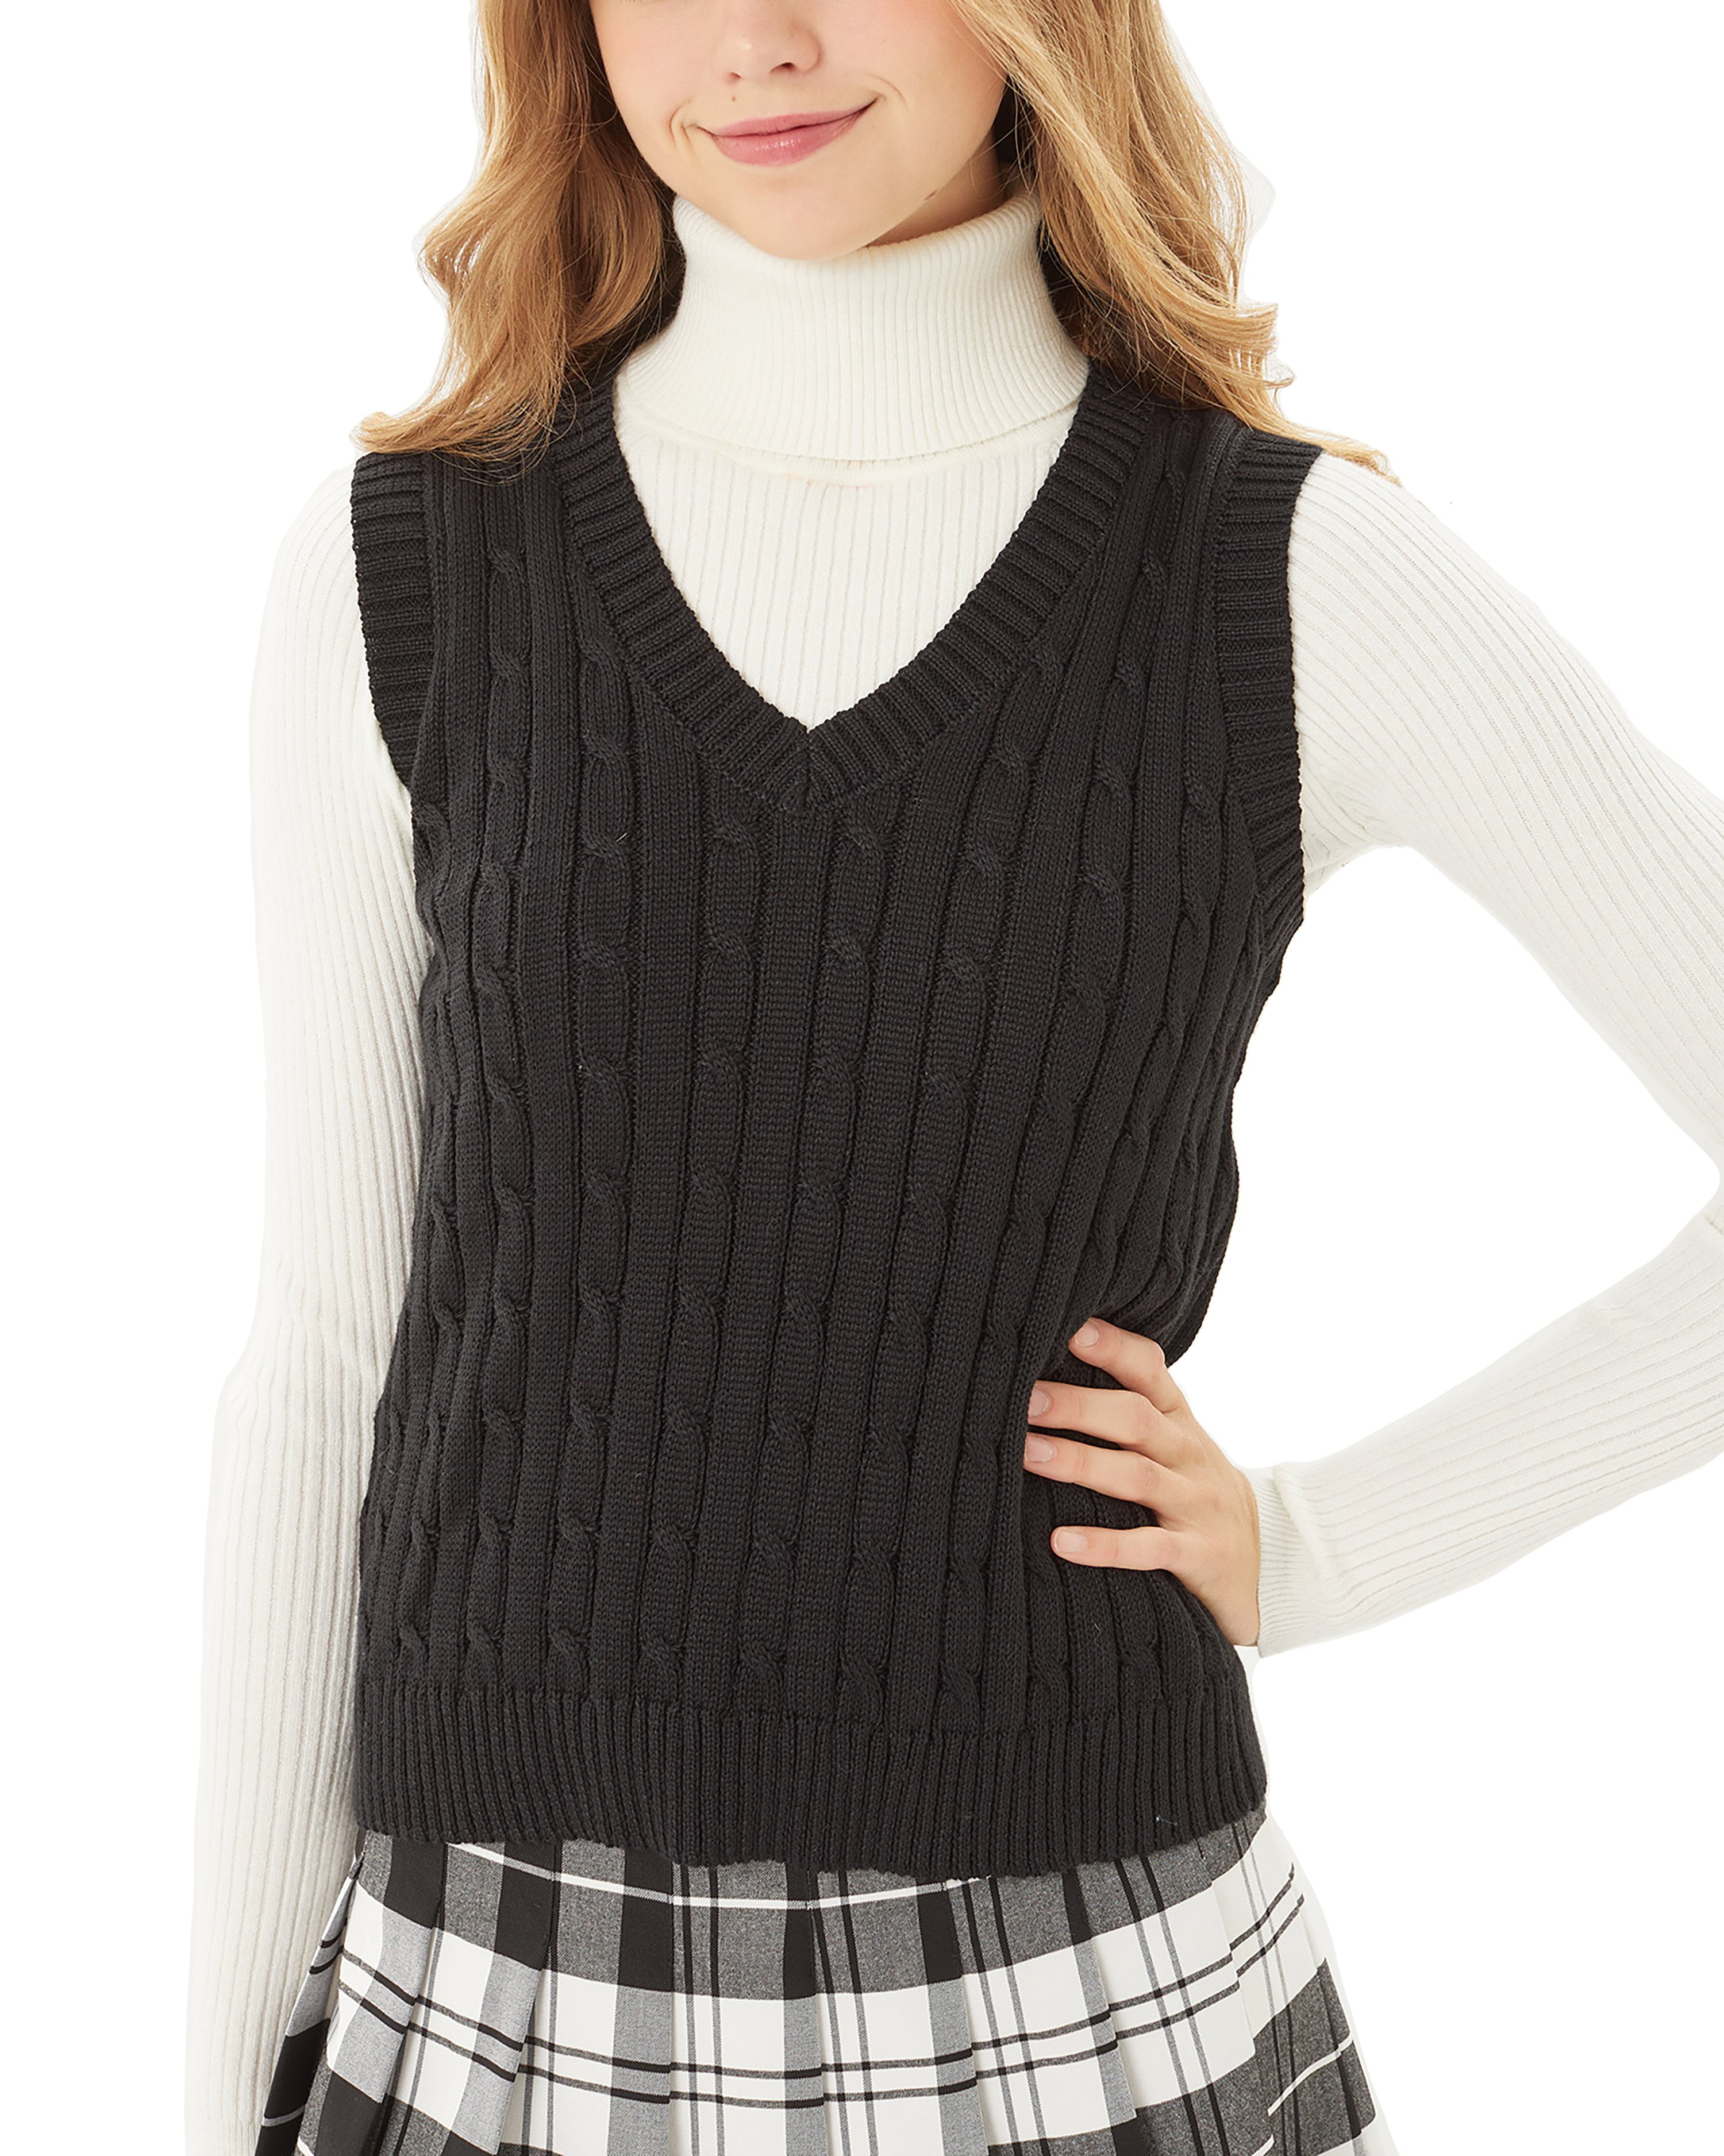 Womens Casual V-Neck Sweater Vest – Solid Sleeveless Pullover Sweater Top  Lt9978ws - Walmart.com